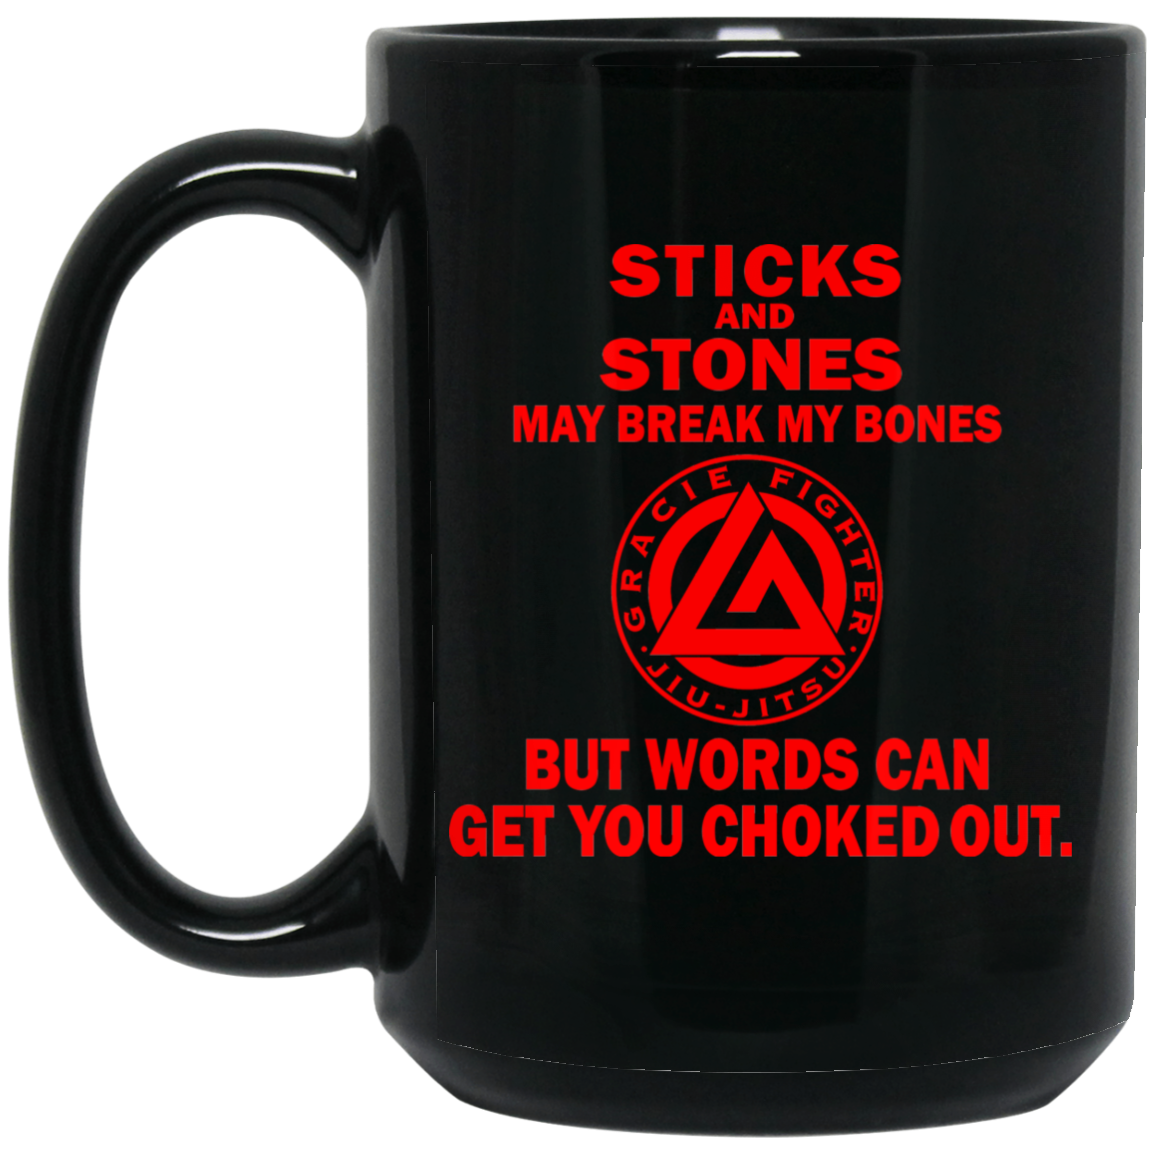 Artichoke Fight Gear Custom Design #16. Sticks And Stones May Break My Bones But Words Can Get You Choked Out. Gracie Fighter. BJJ. 15 oz. Black Mug